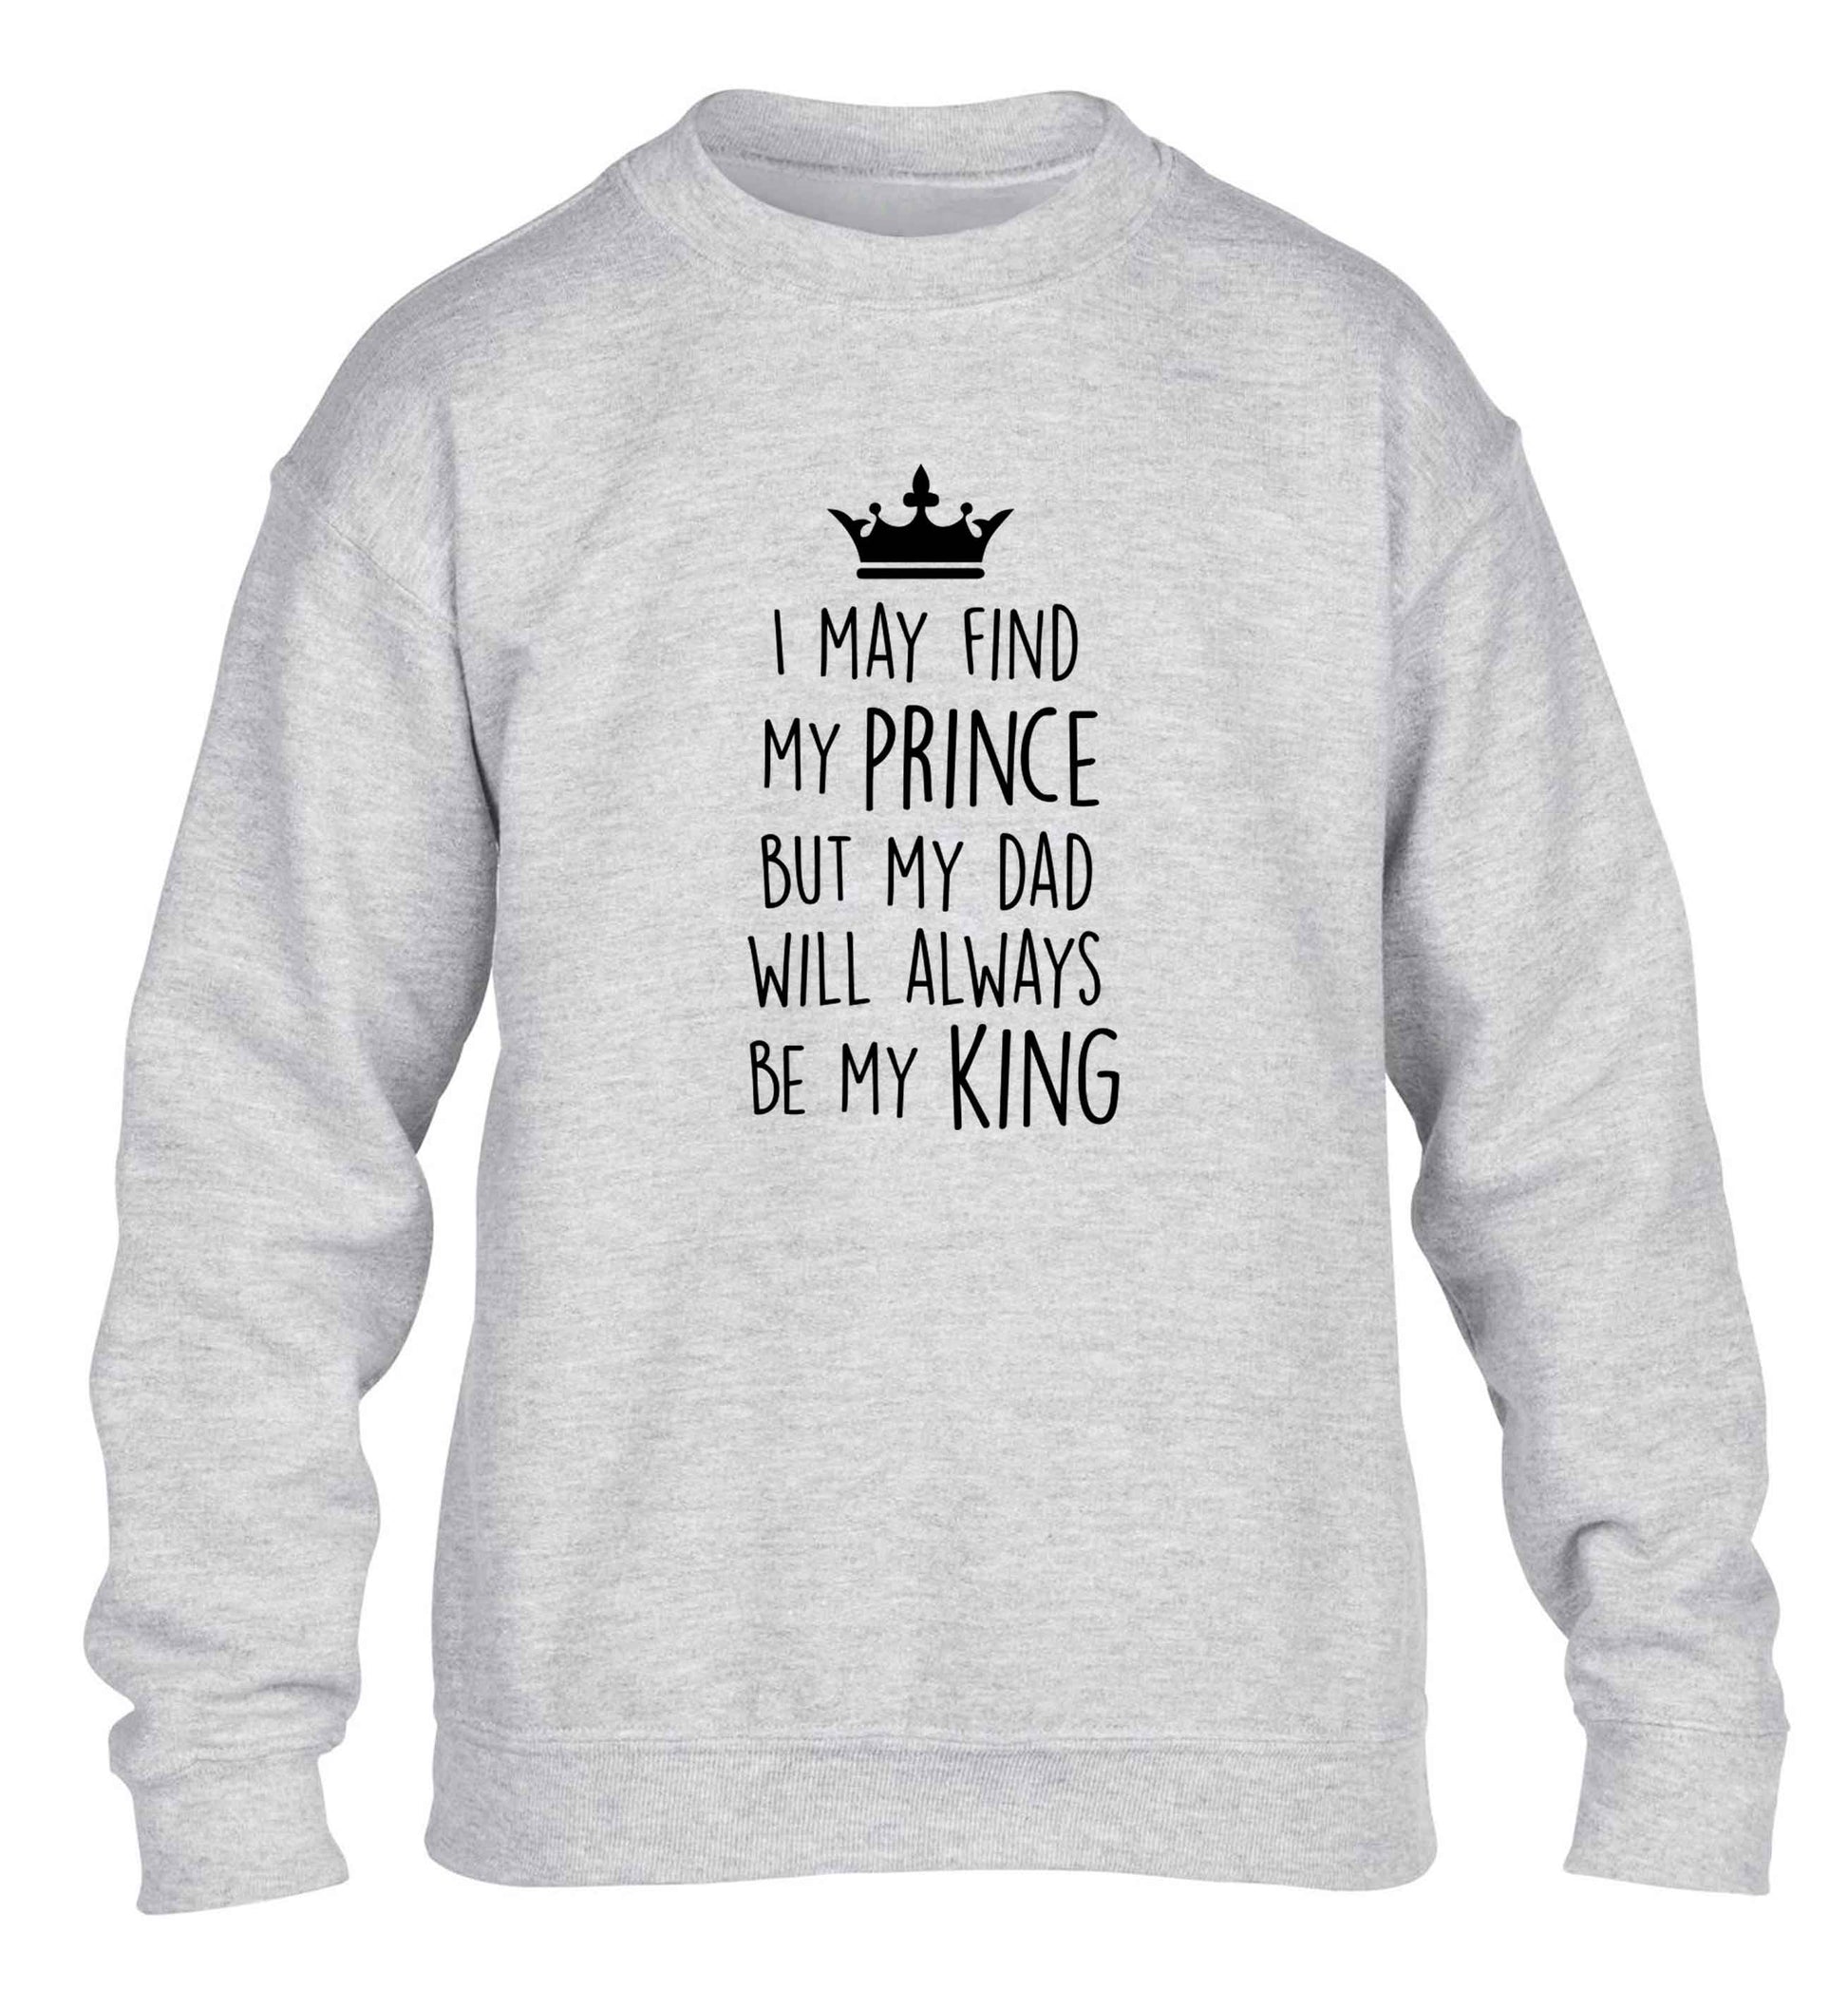 I may find my prince but my dad will always be my king children's grey sweater 12-13 Years